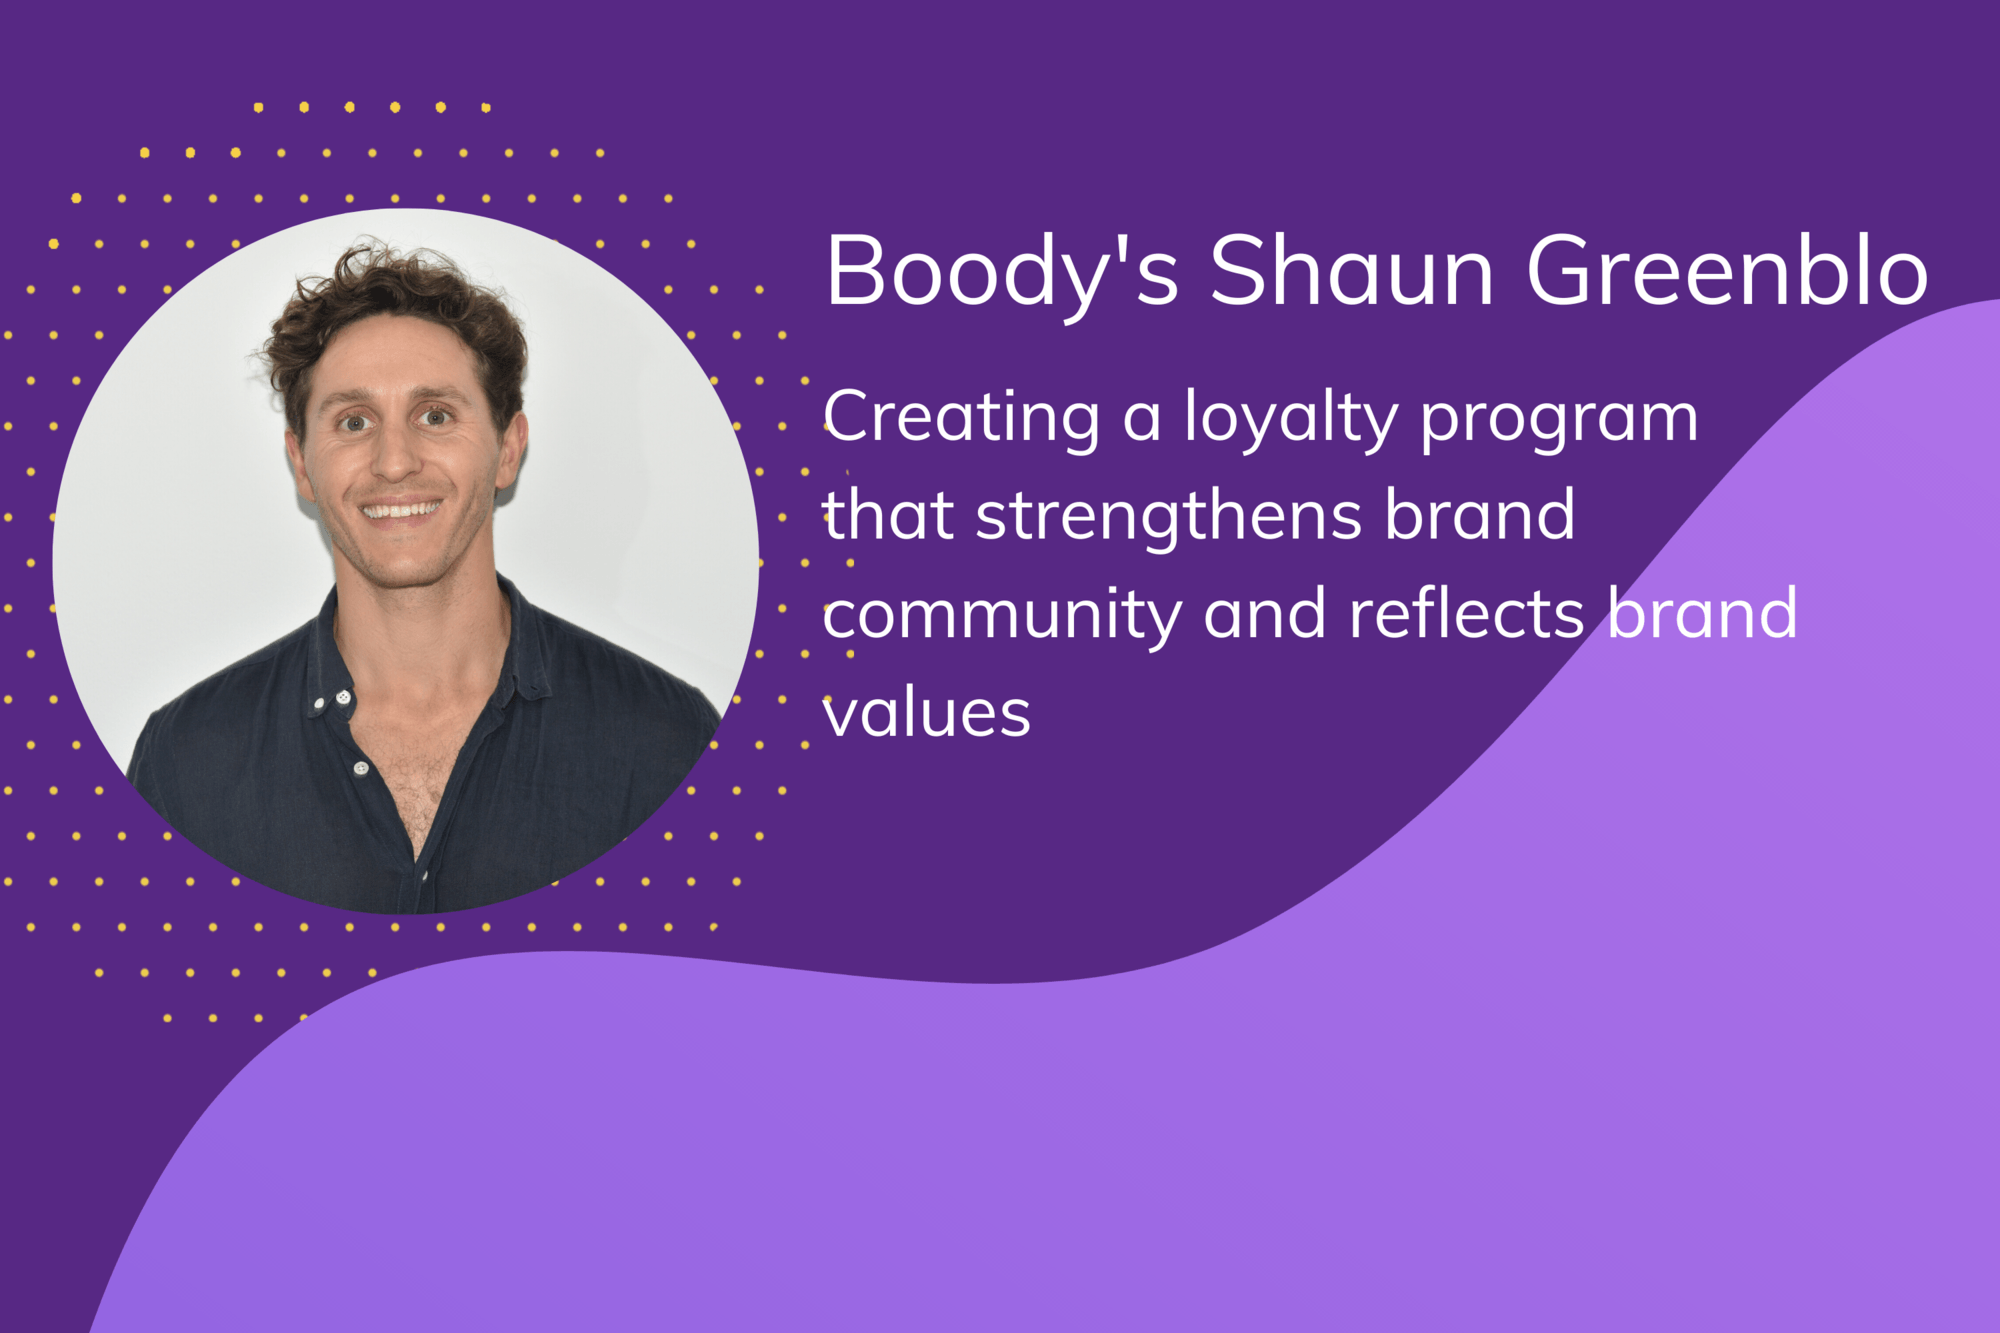 Interview with Boody: How they created their loyalty program